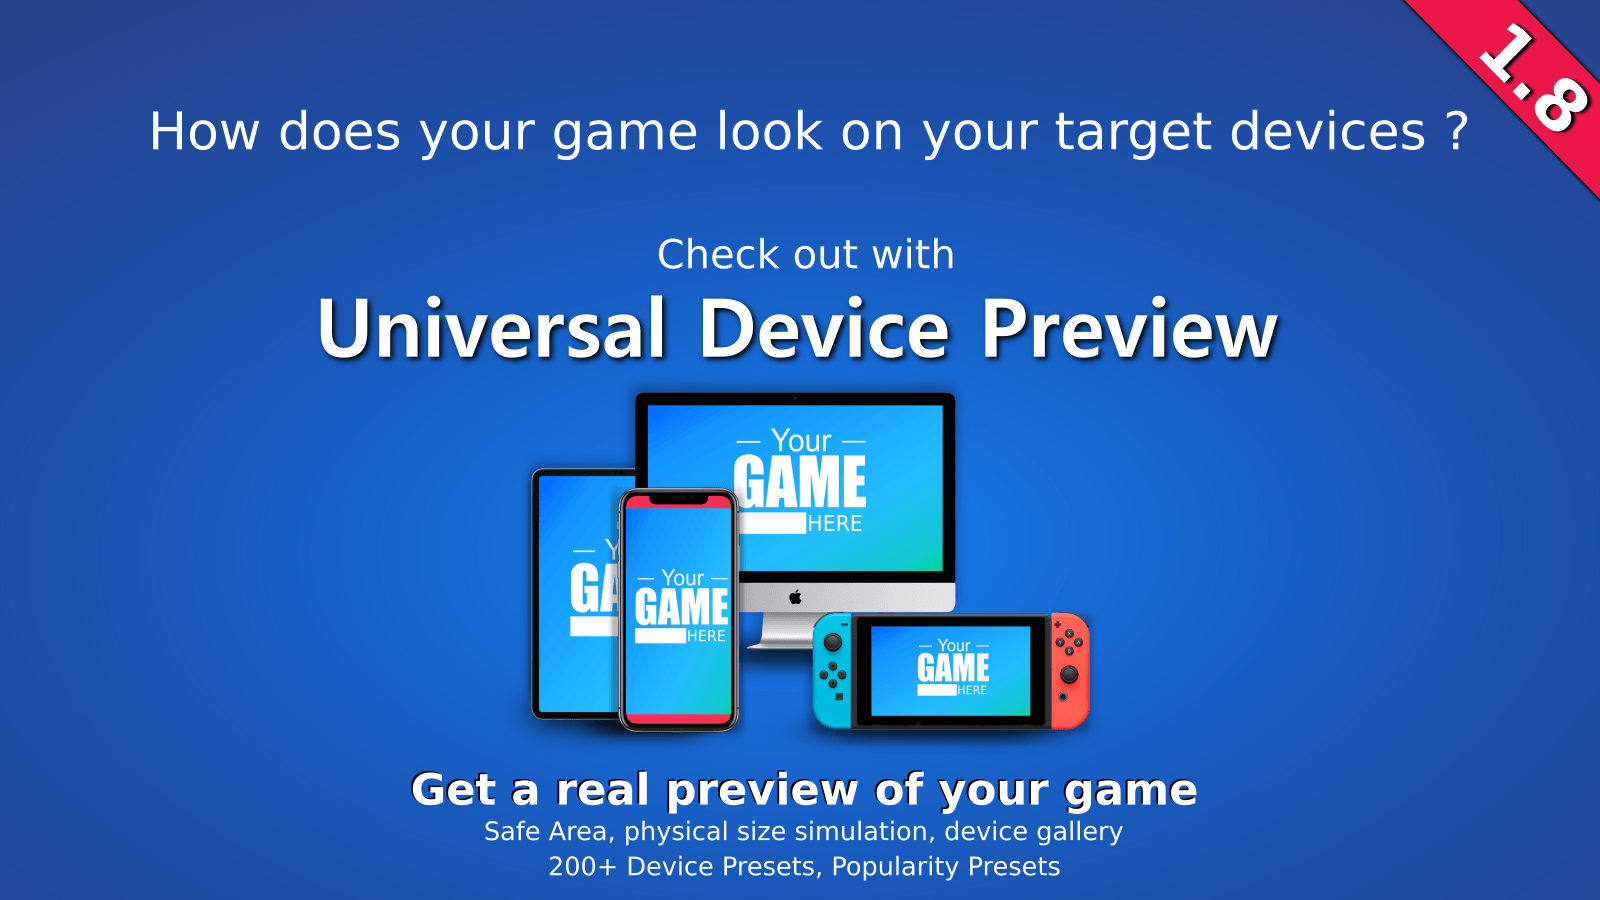 Your games your devices. Nice device превью.